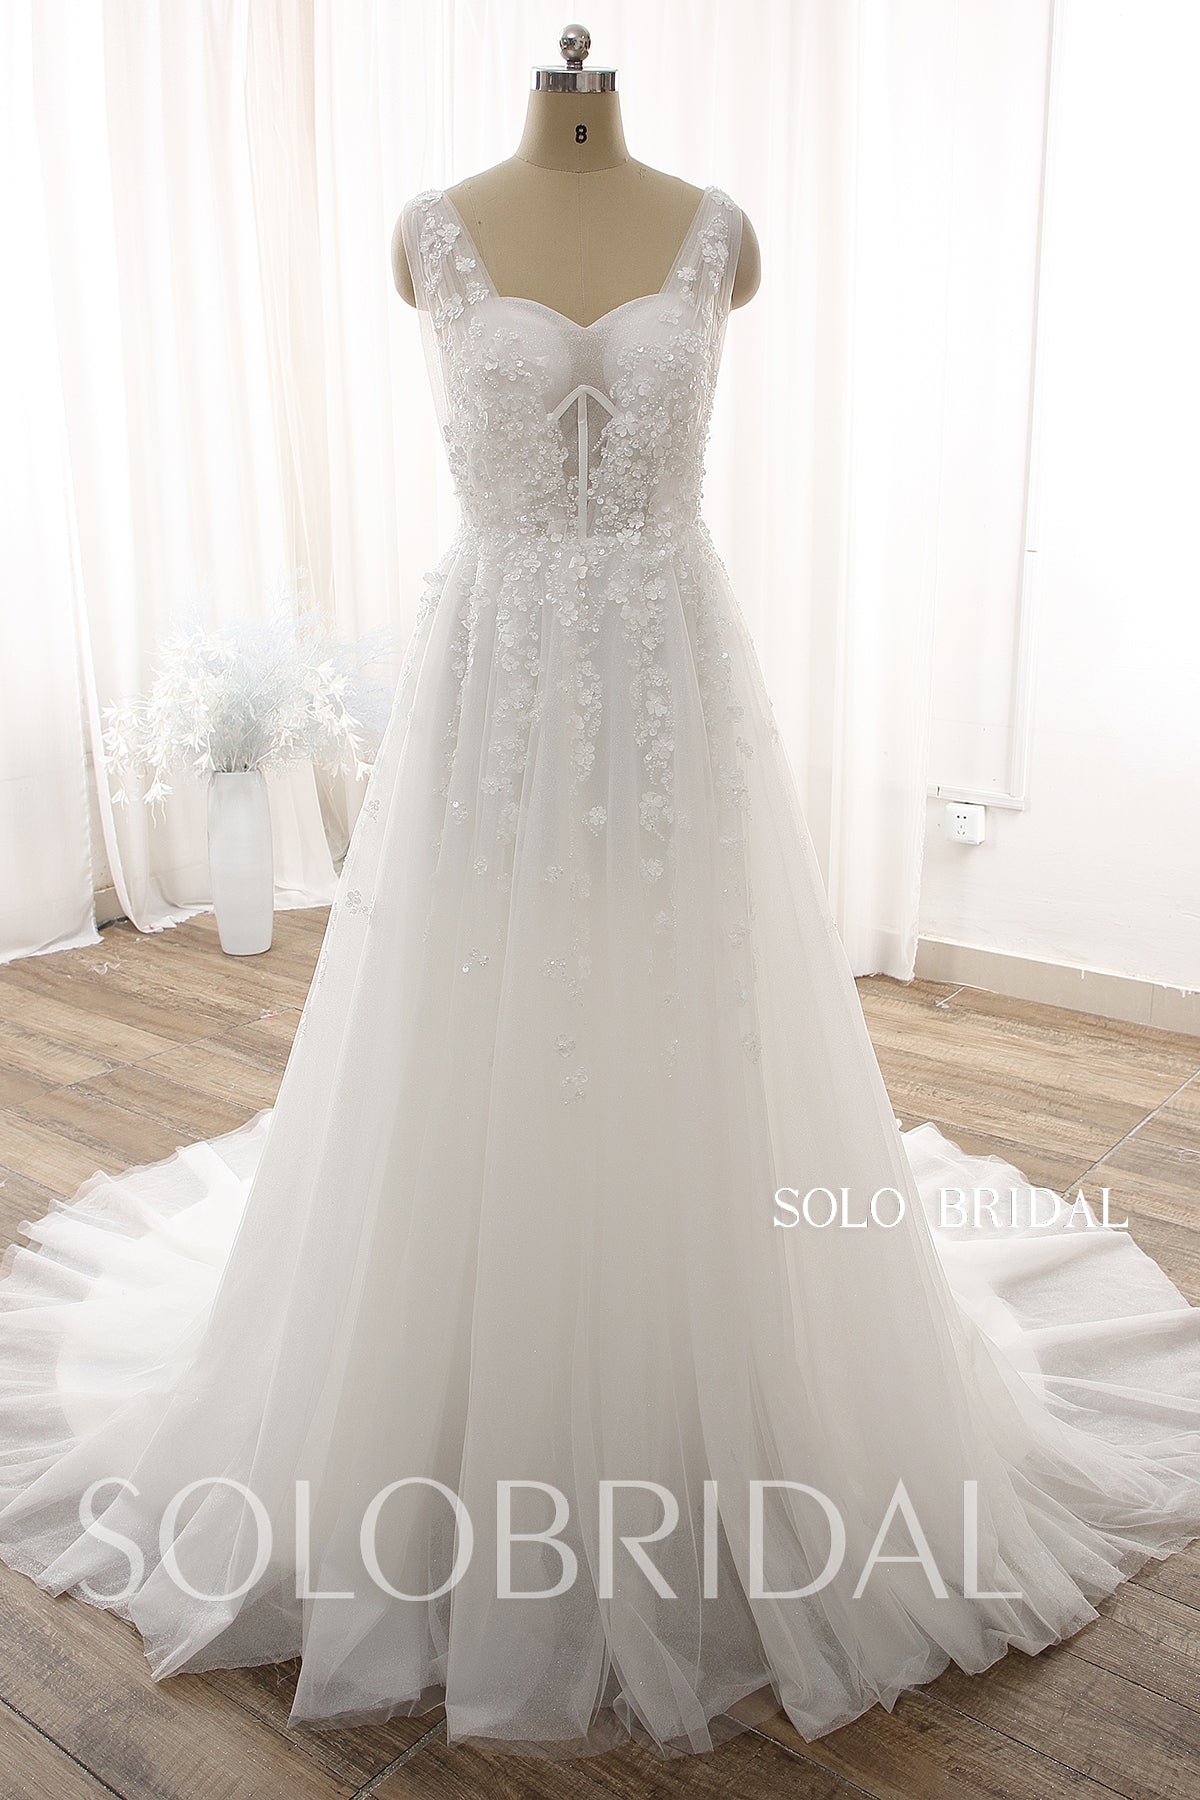 Ivory Small A line Tulle Wedding Dress DPP_0057